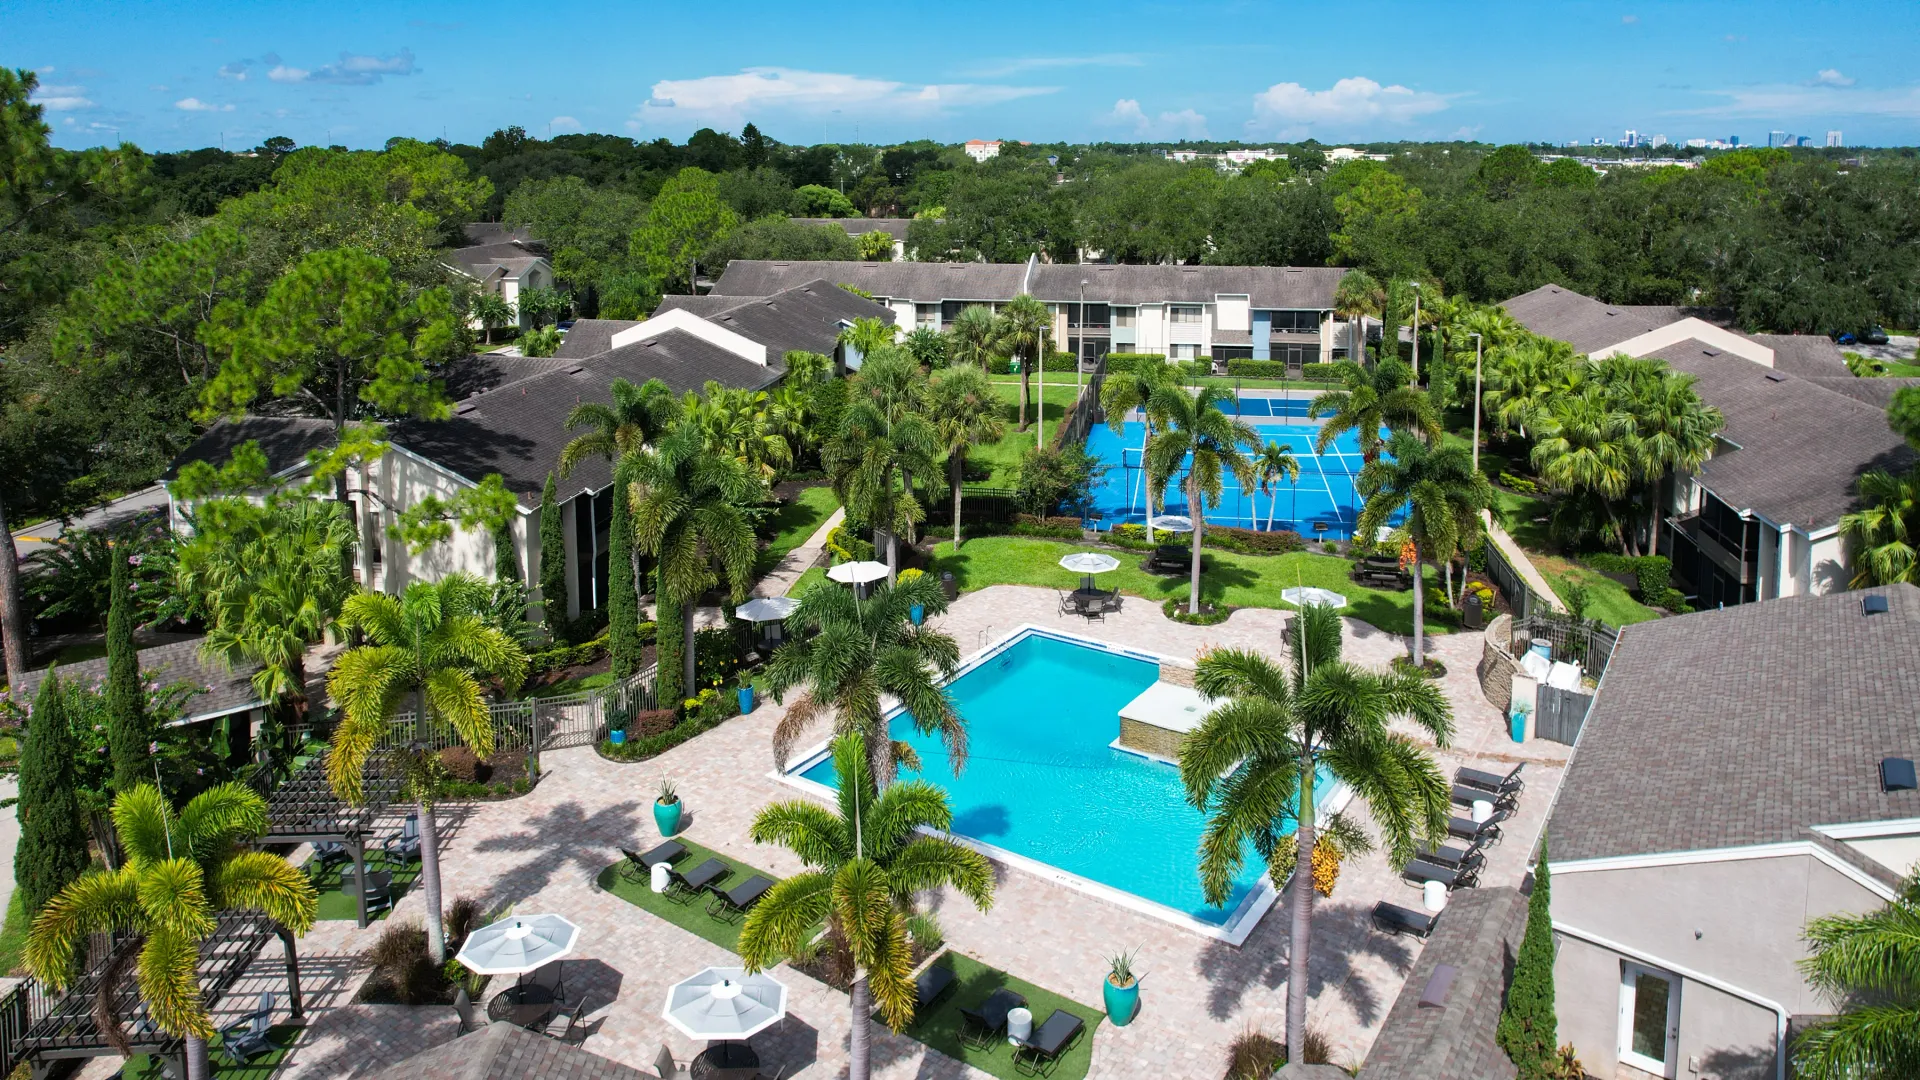 Aerial view of Harper Grand Apartments featuring a sparkling pool, lush landscaping, and a tennis court, showcasing the resort-style amenities available to residents.